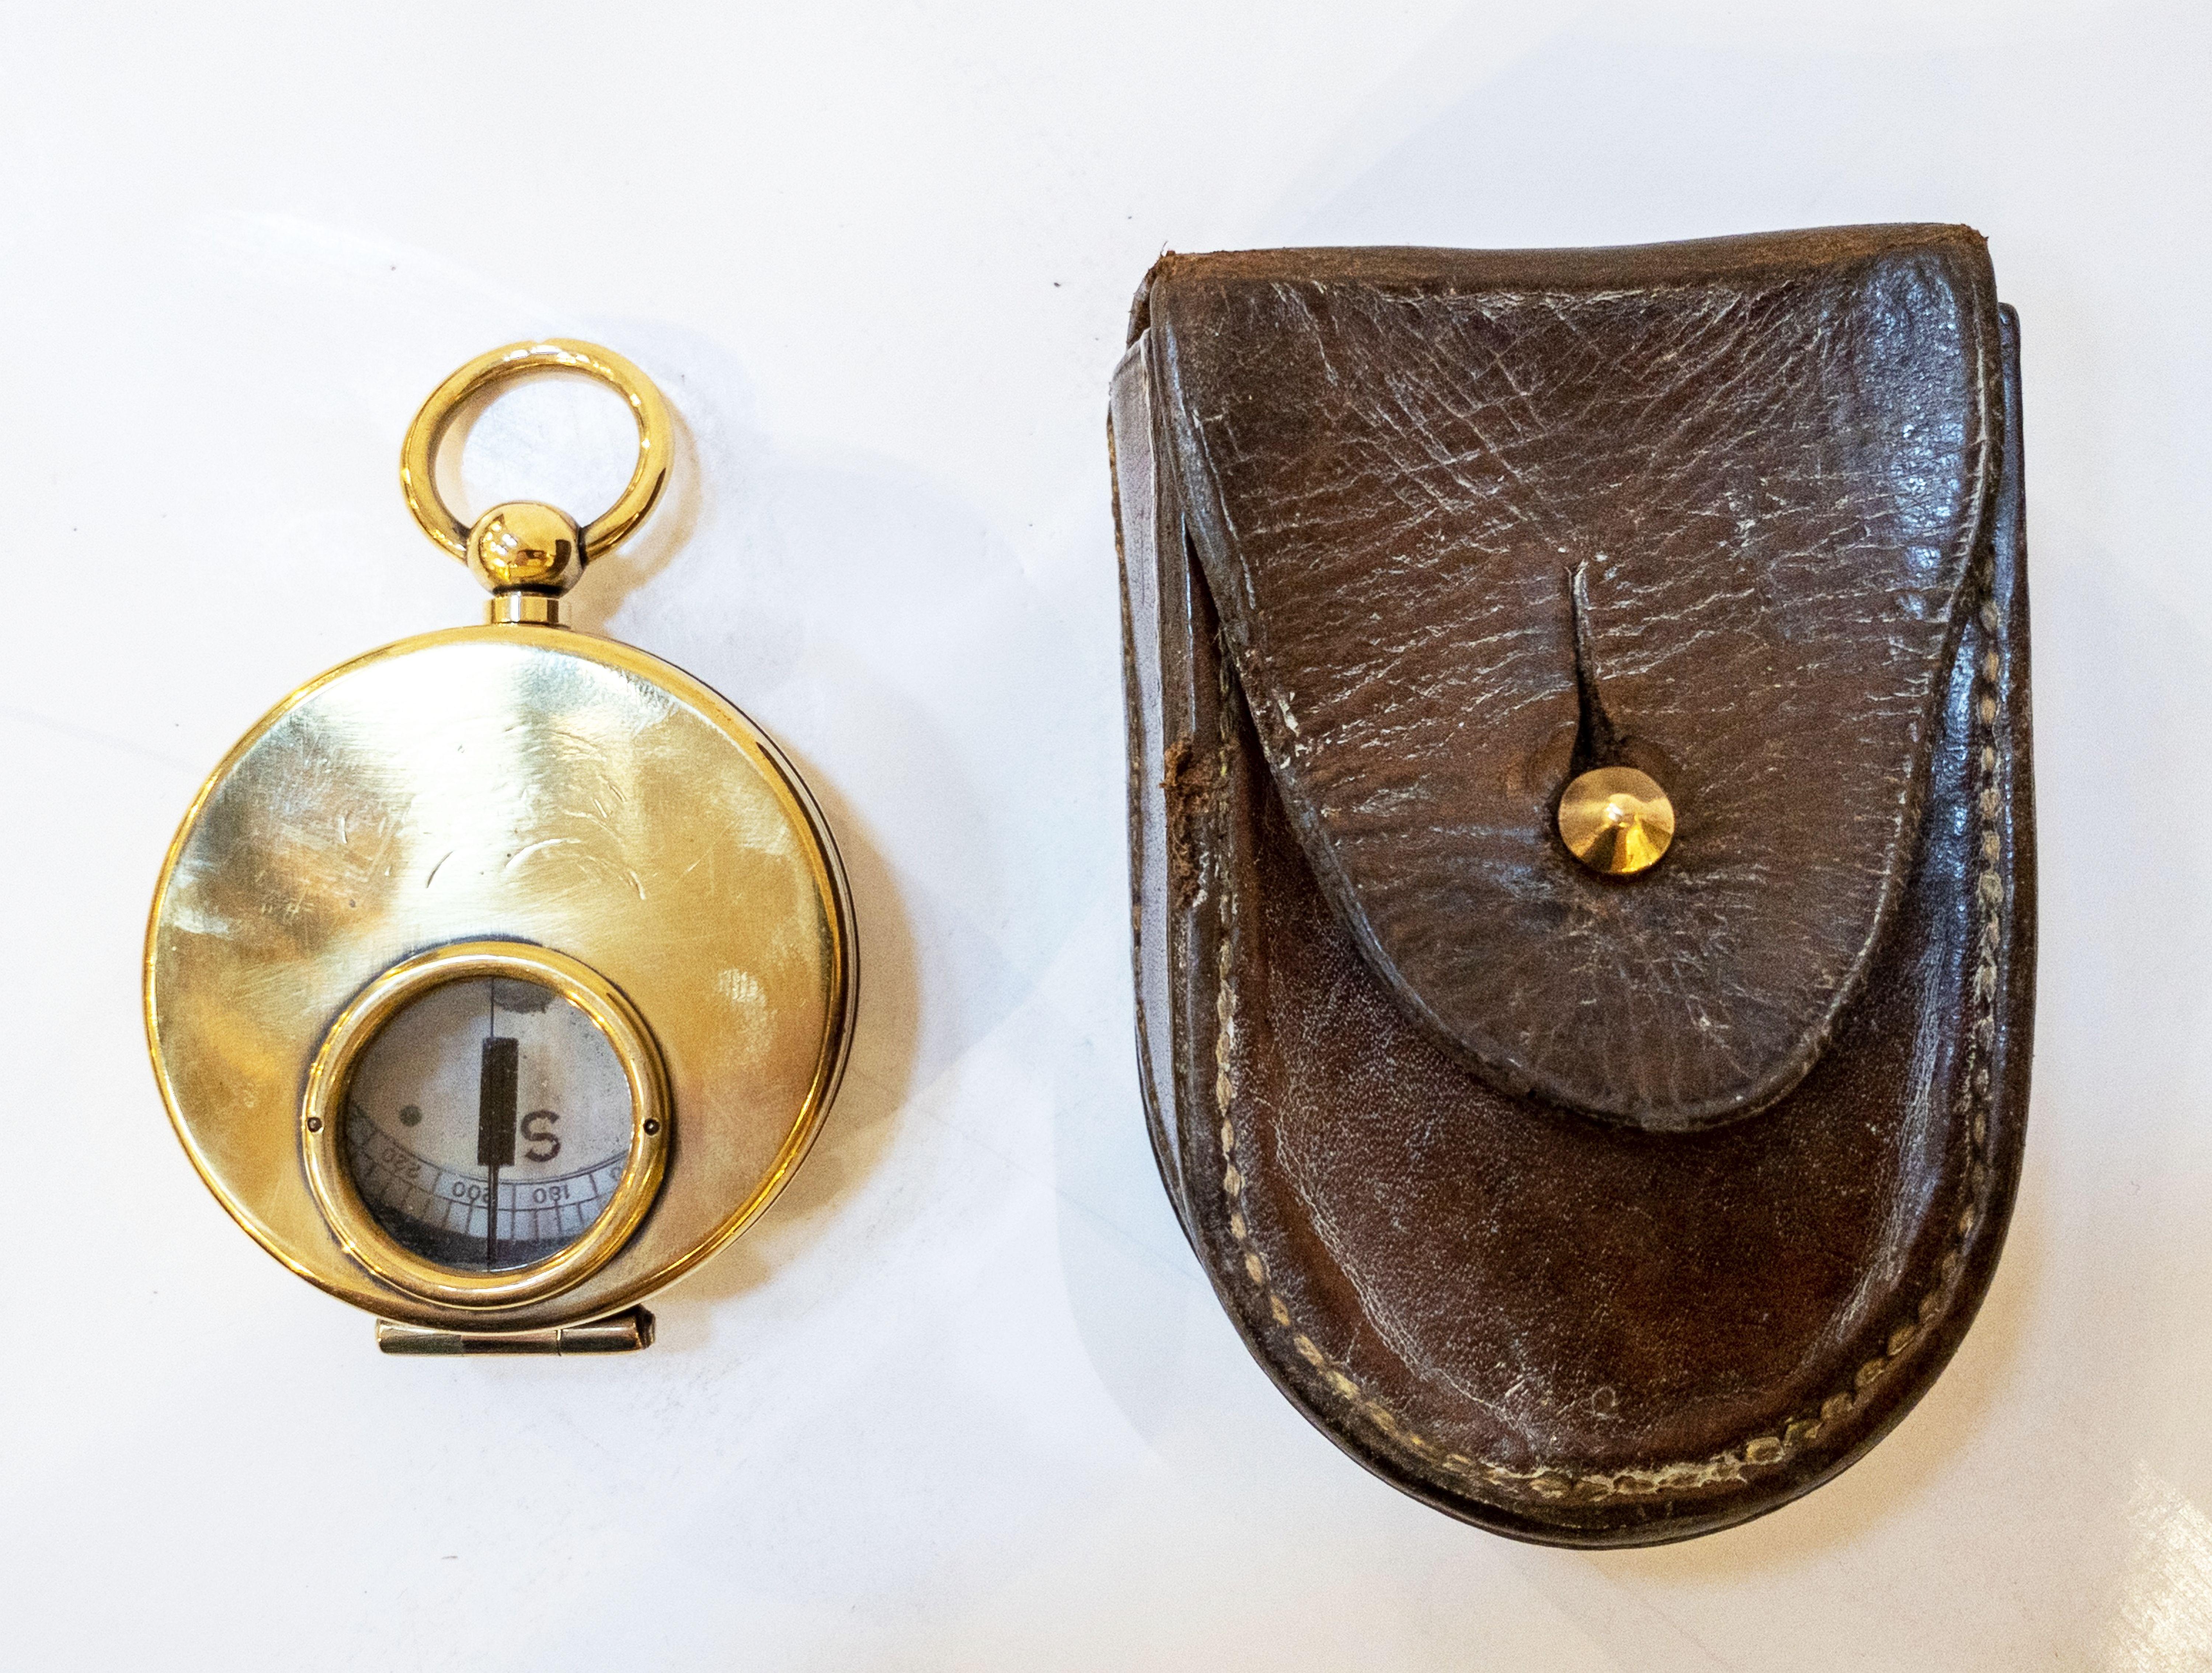 A working British military officer's marching or sighting compass of heavy brass in original leather case.